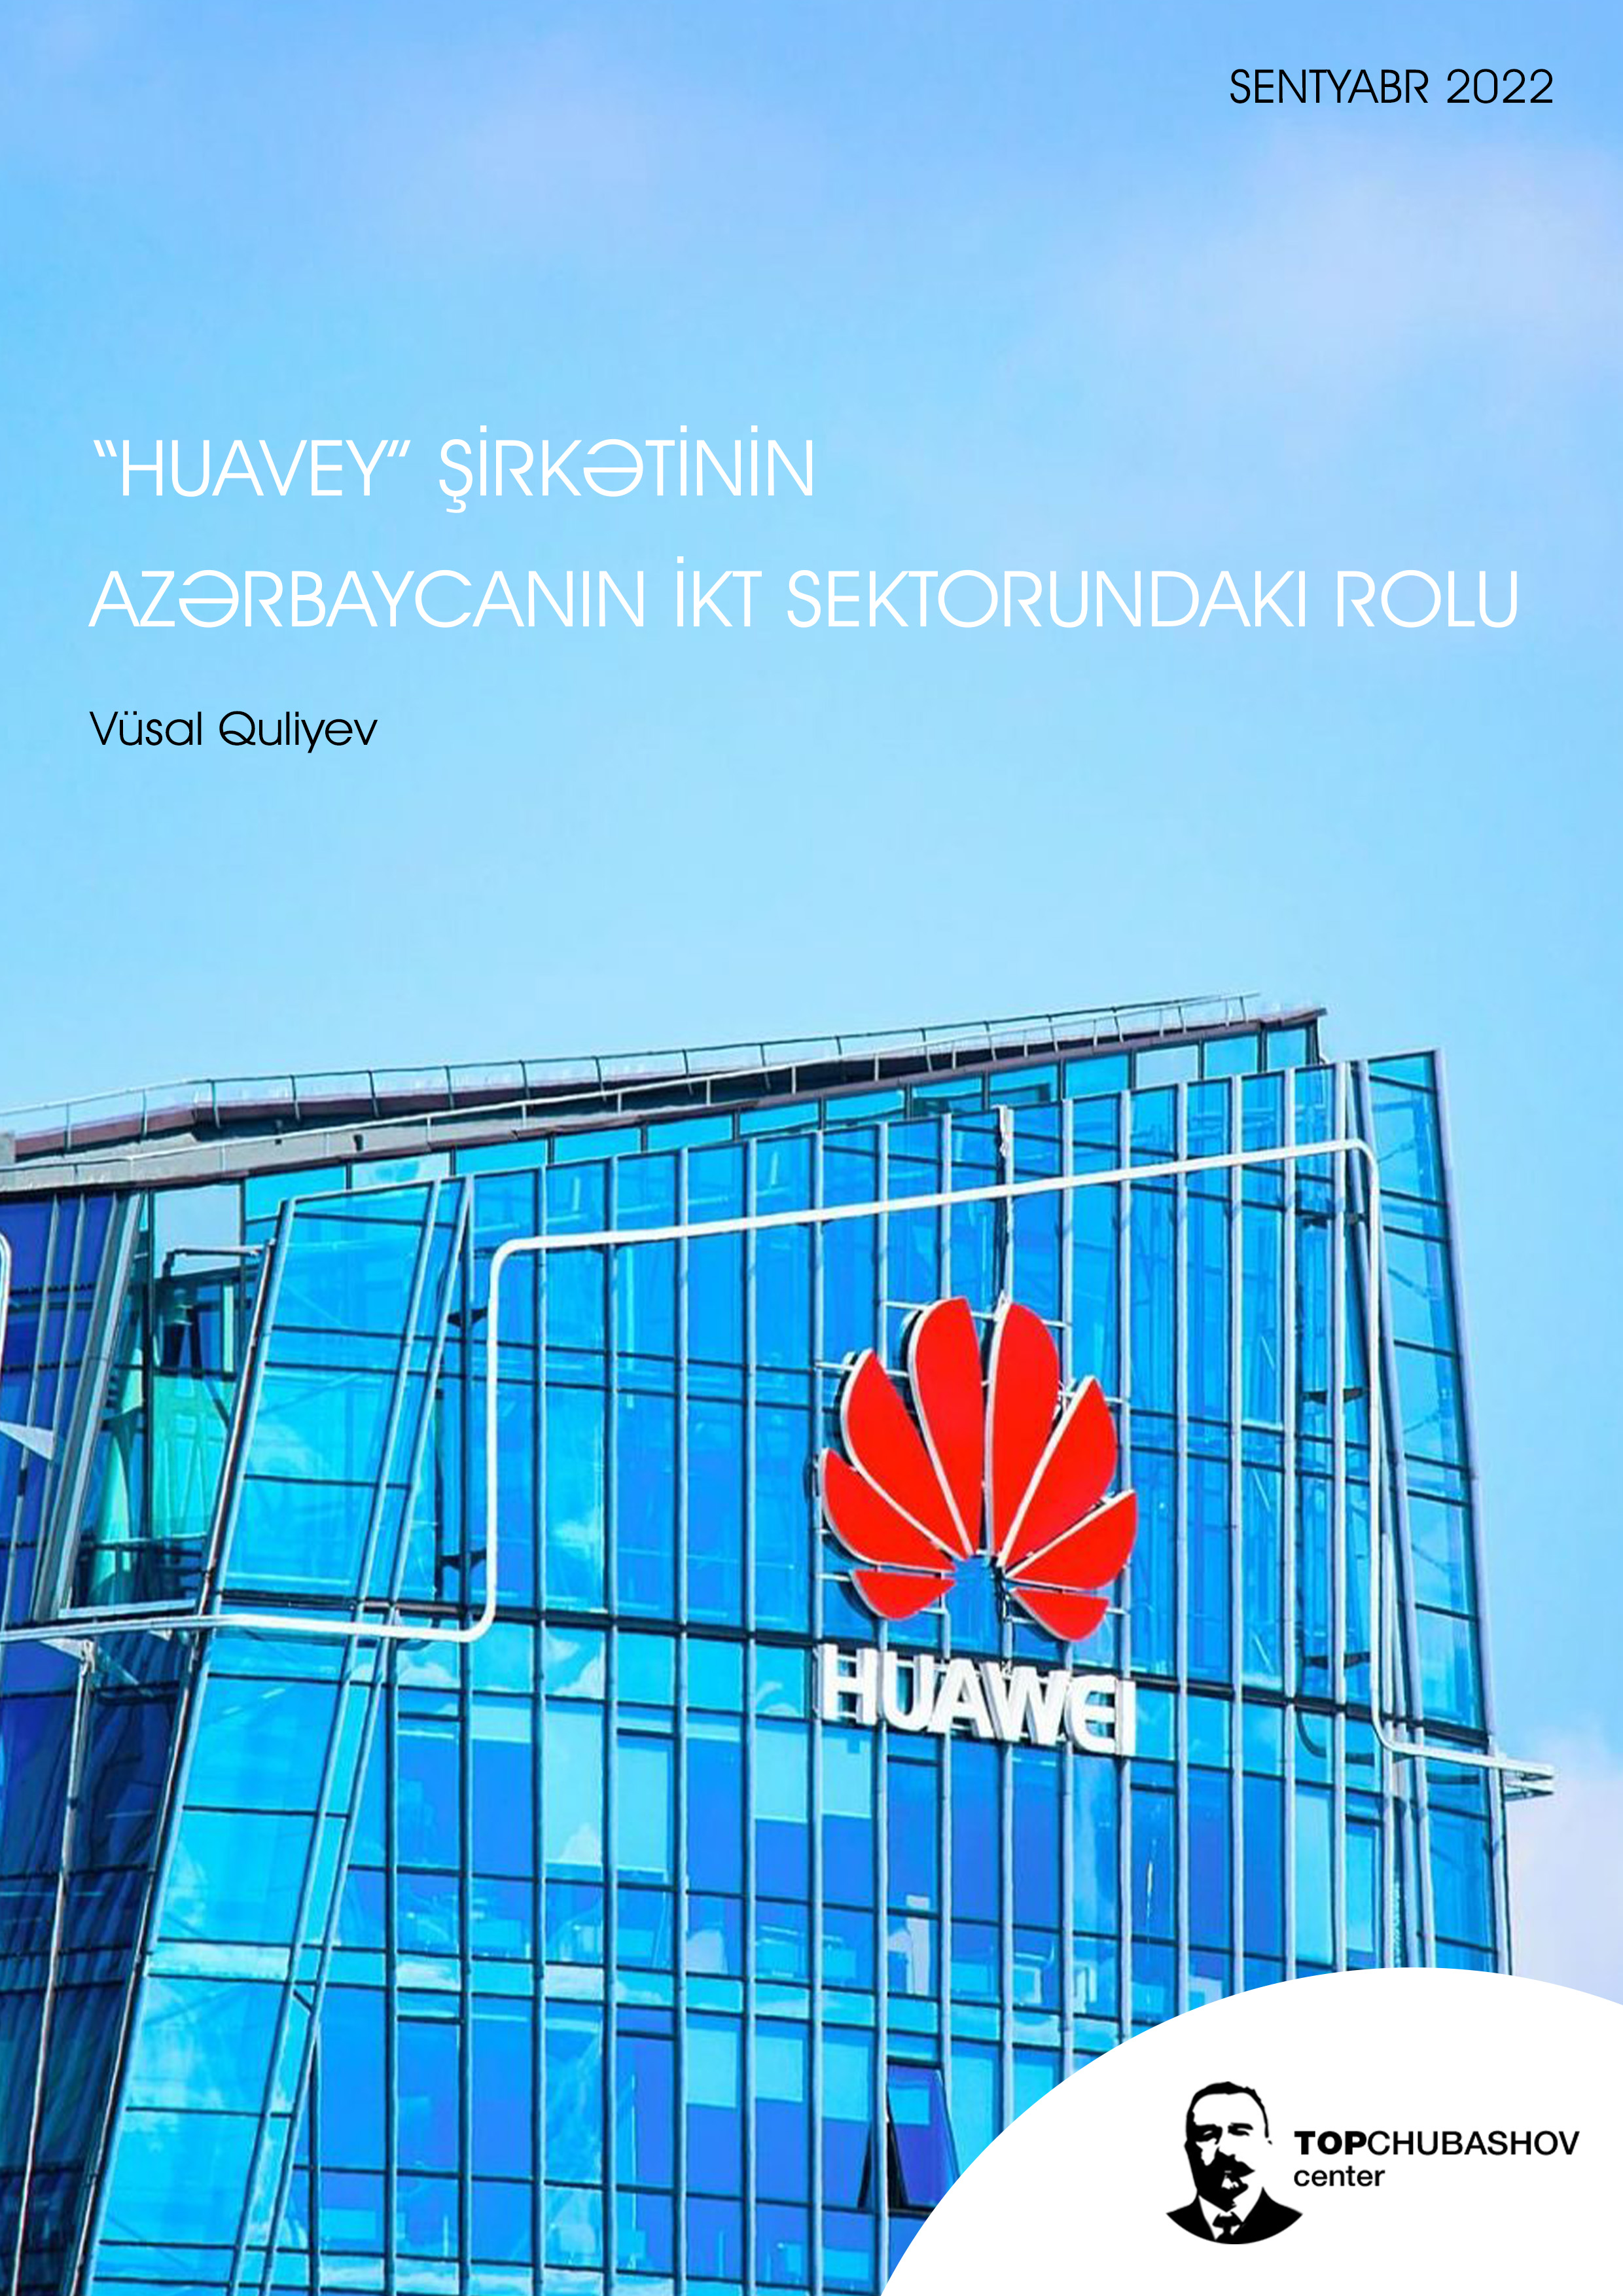 The role of Huawei in the ICT sector of Azerbaijan